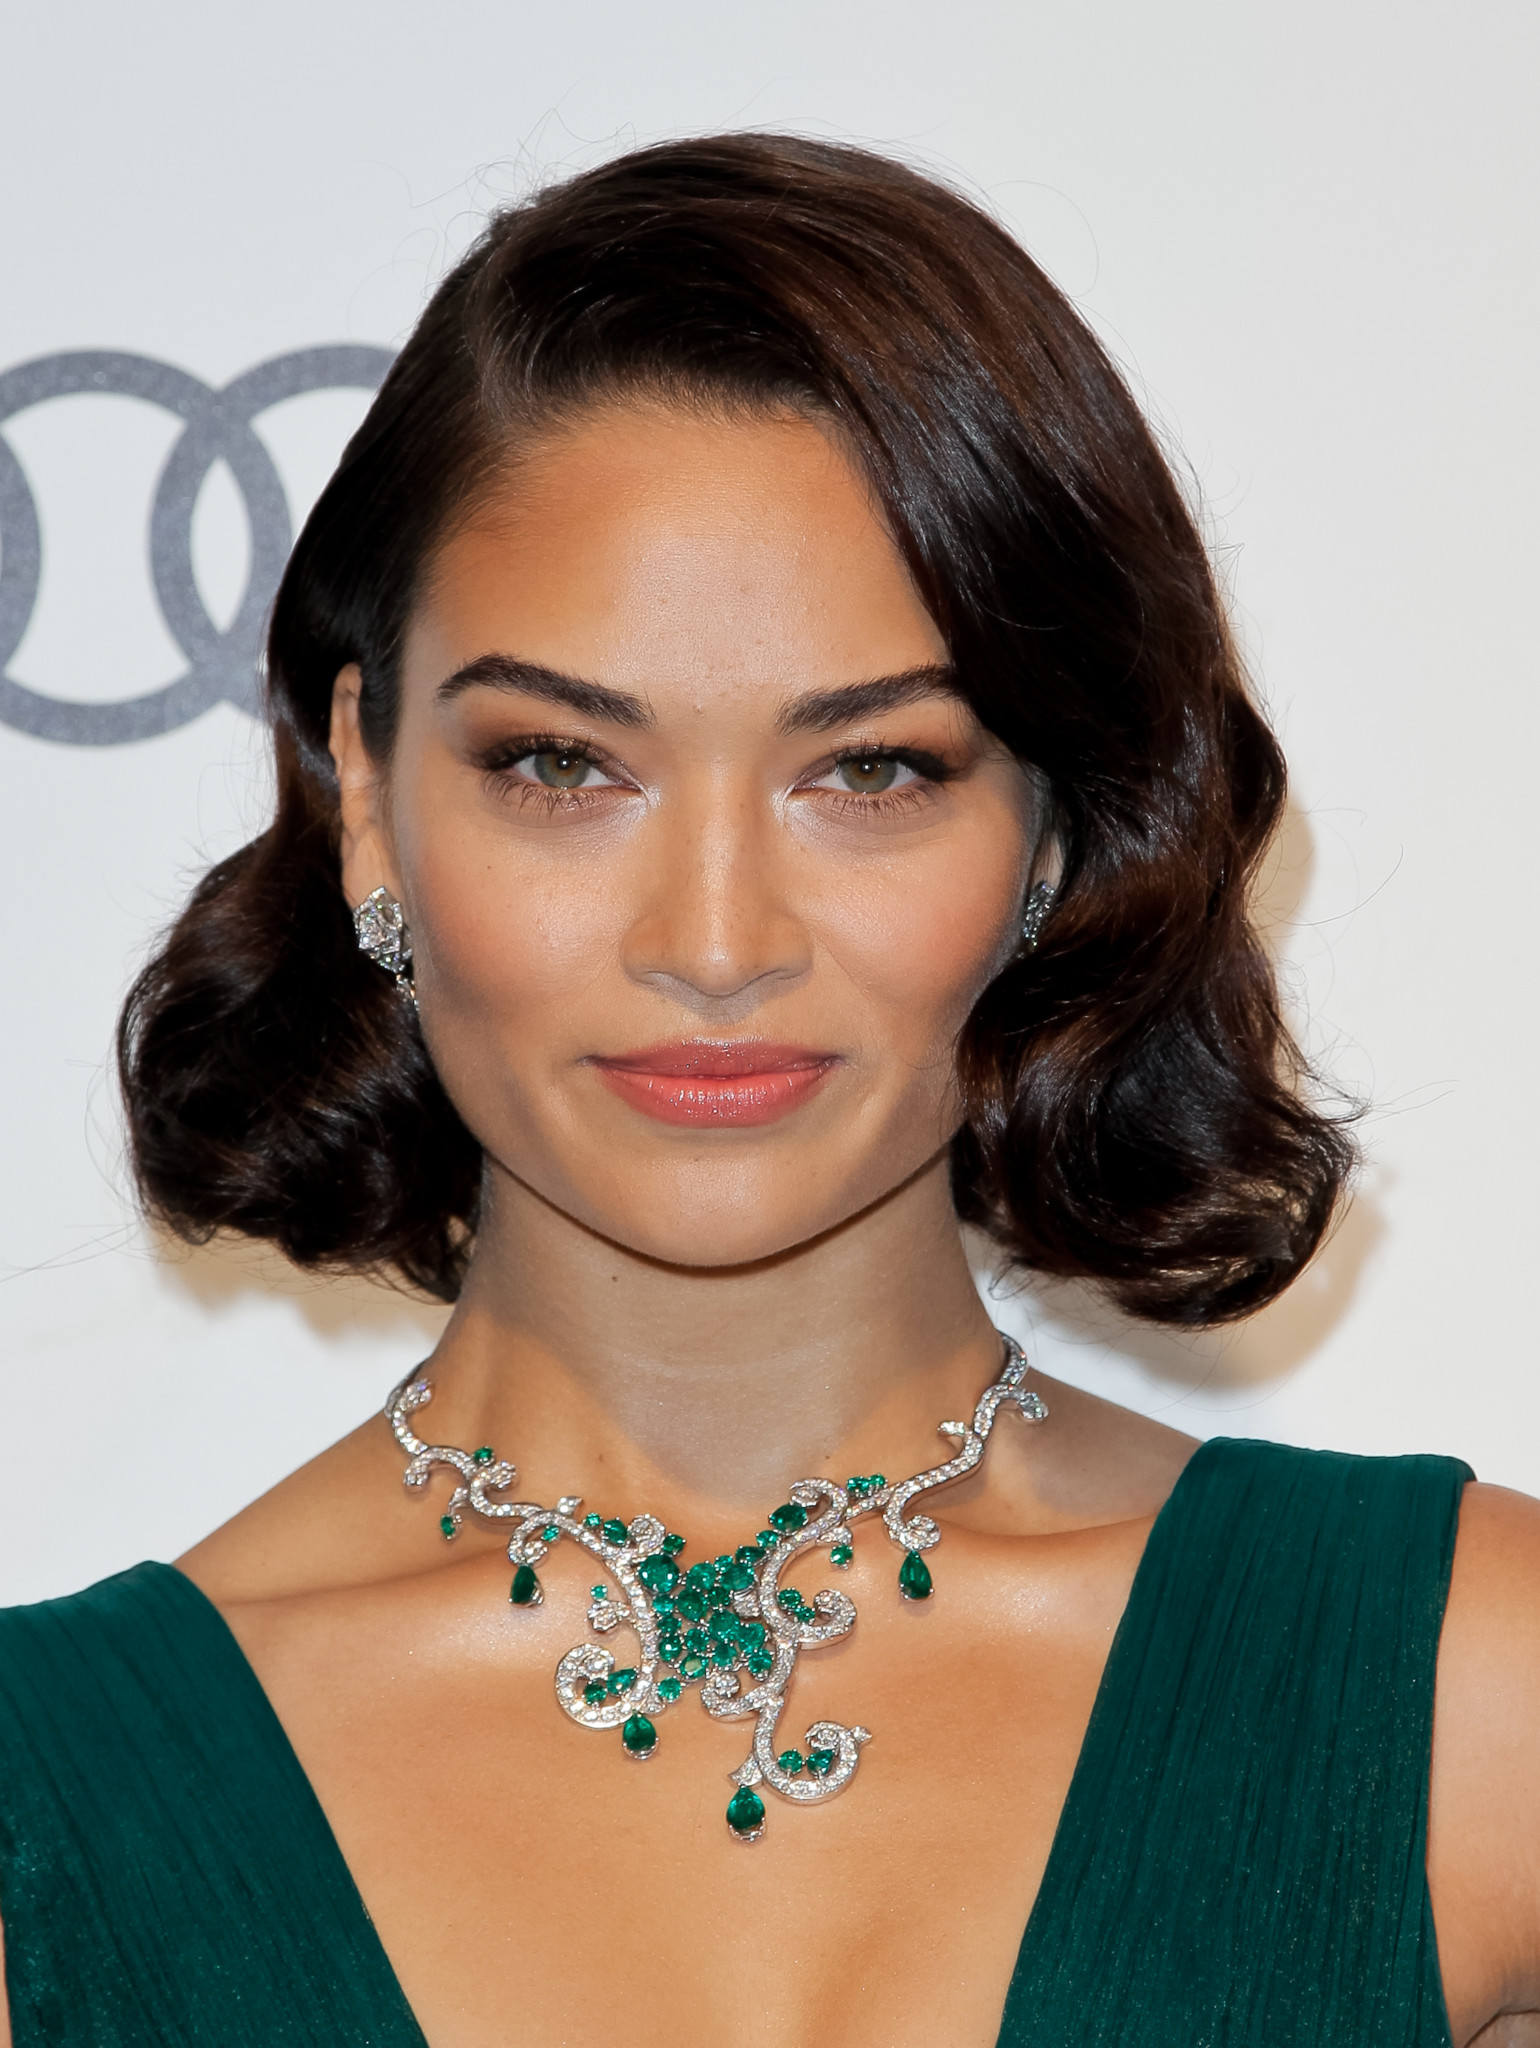 Australiam model shanina shaik poses upon her arrival for the 25th annual elton john aids foundation's academy awards viewing party on february 26, 2017 in west hollywood, california. / afp / tibrina hobson (photo credit should read tibrina hobson/afp/getty images)